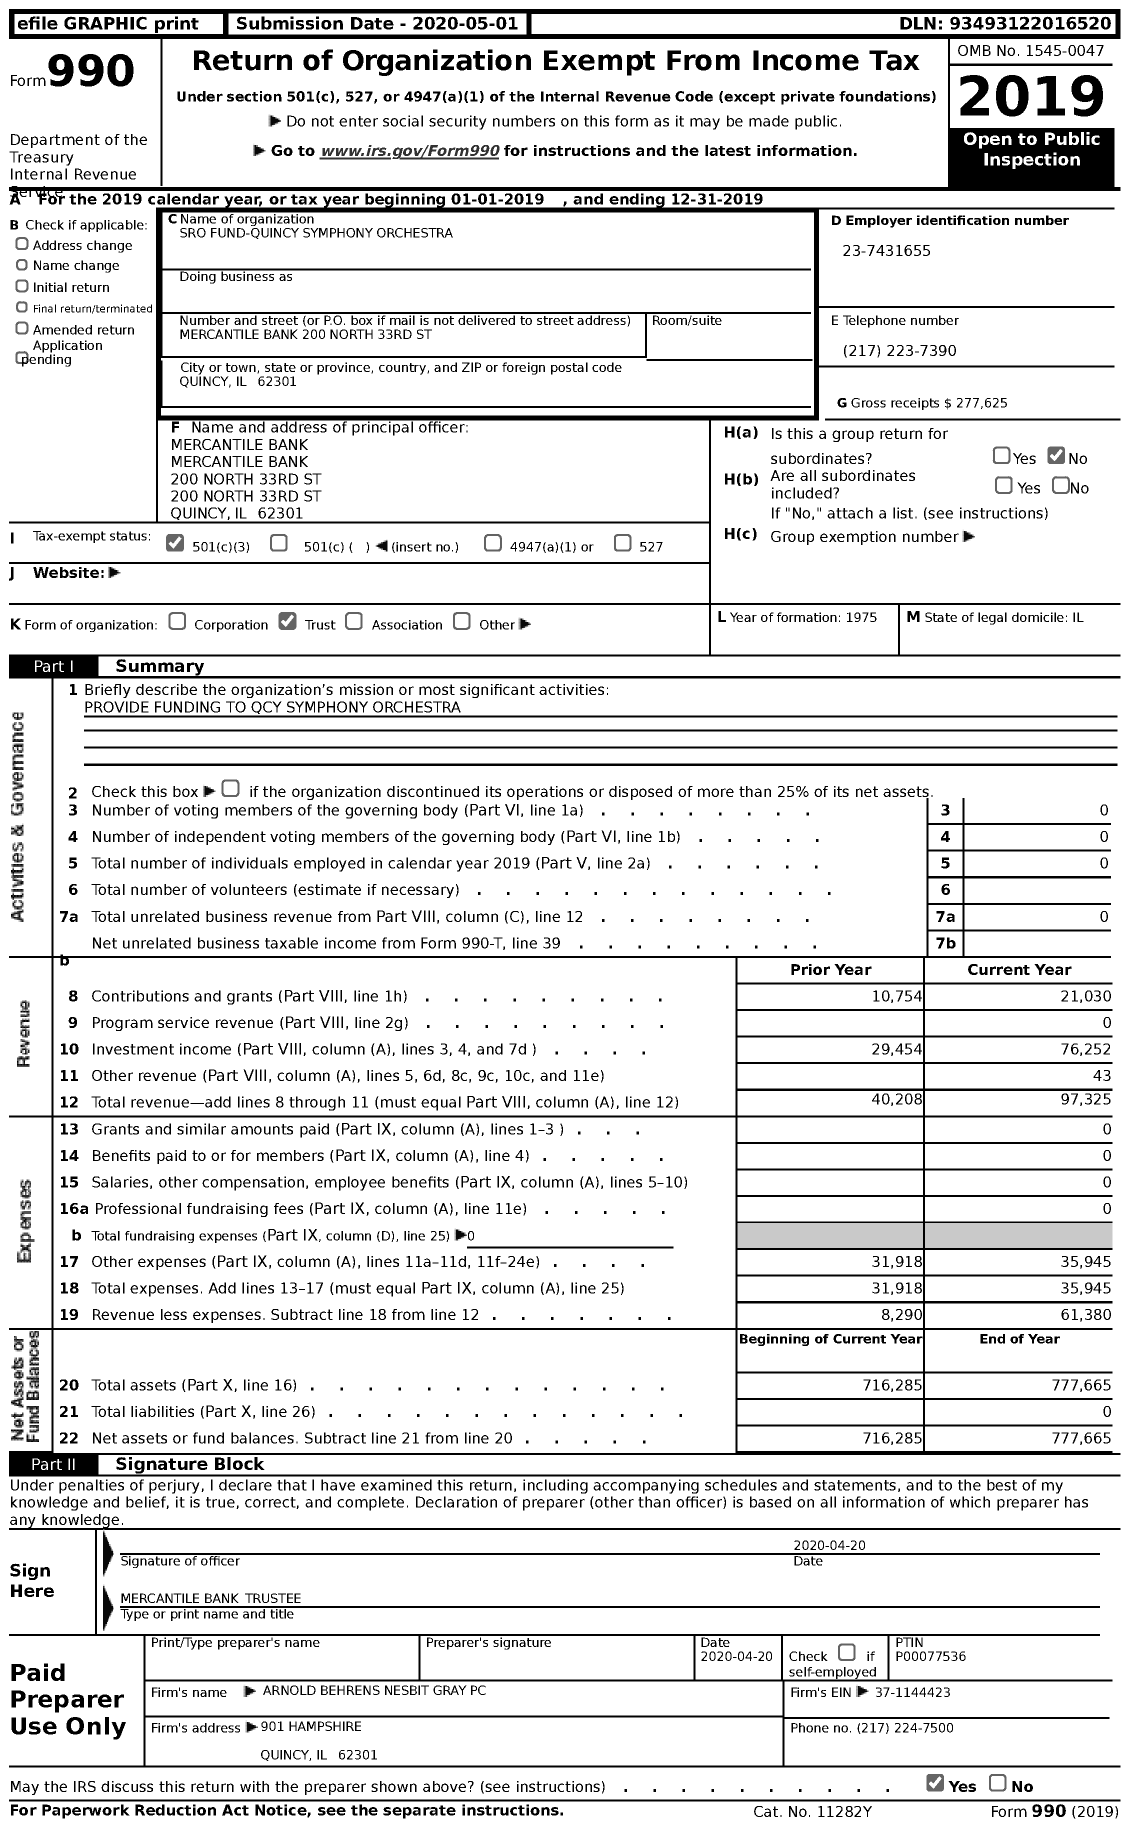 Image of first page of 2019 Form 990 for Sro Fund-Quincy Symphony Orchestra